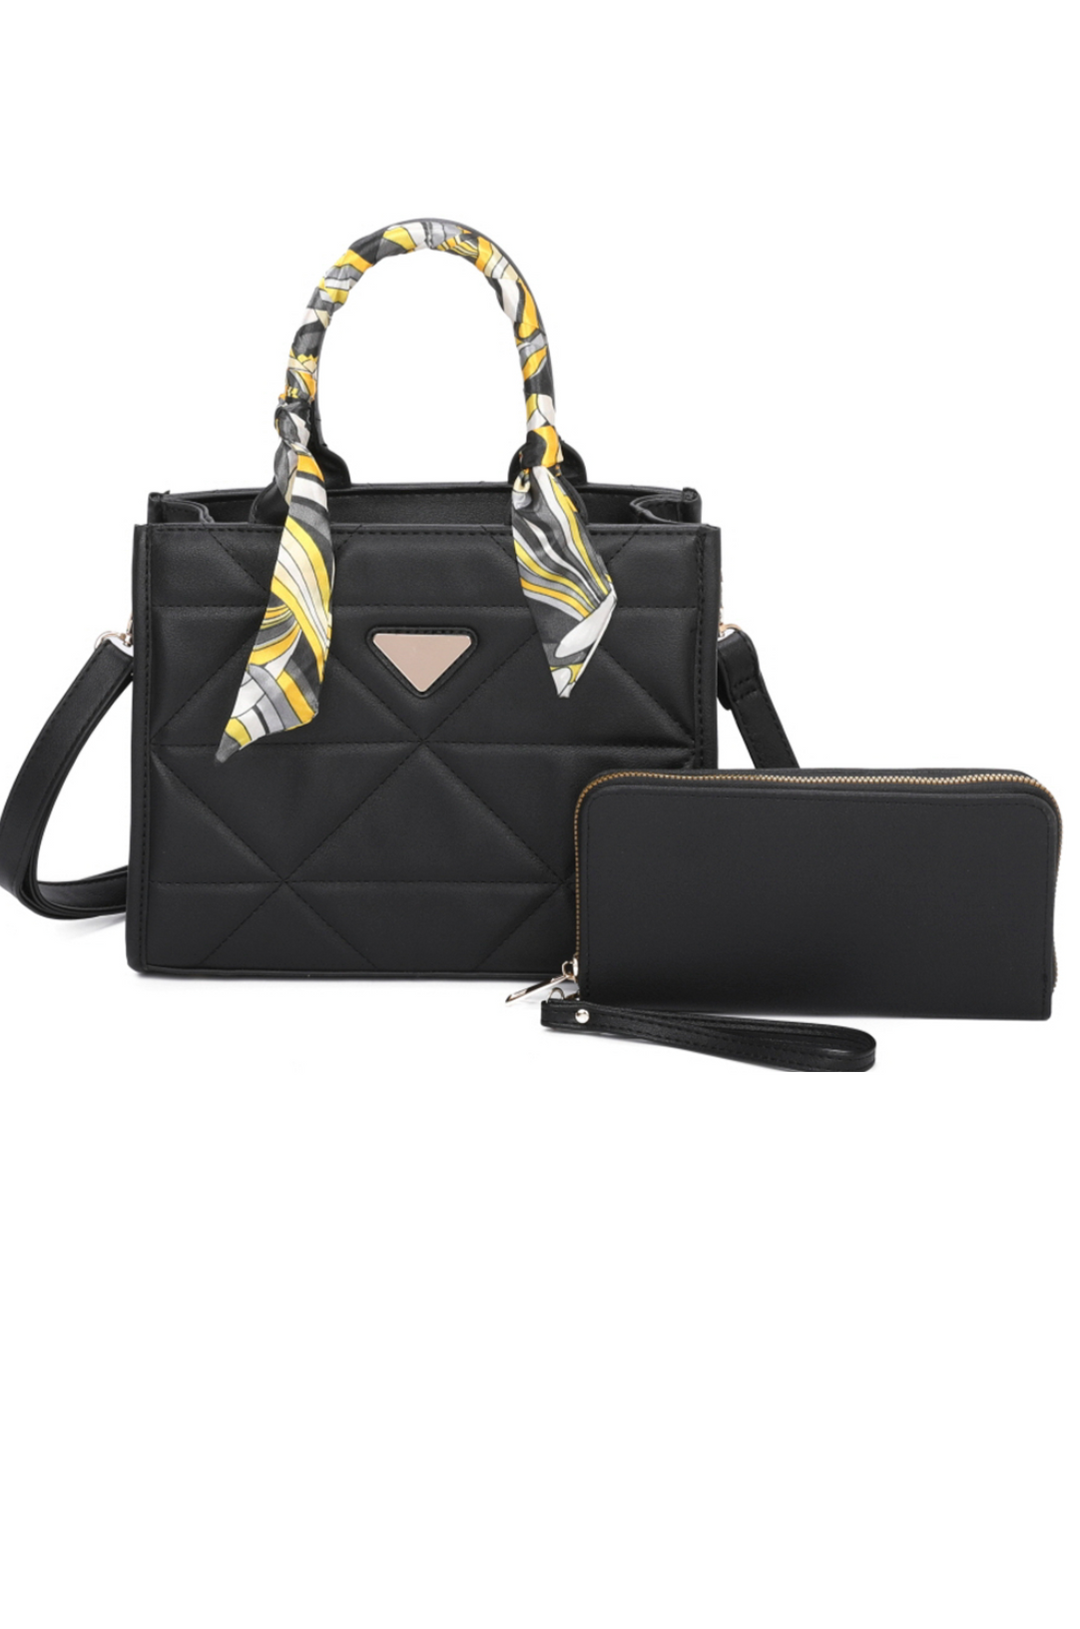 Not My Problem Purse in Black - ShopSpoiled